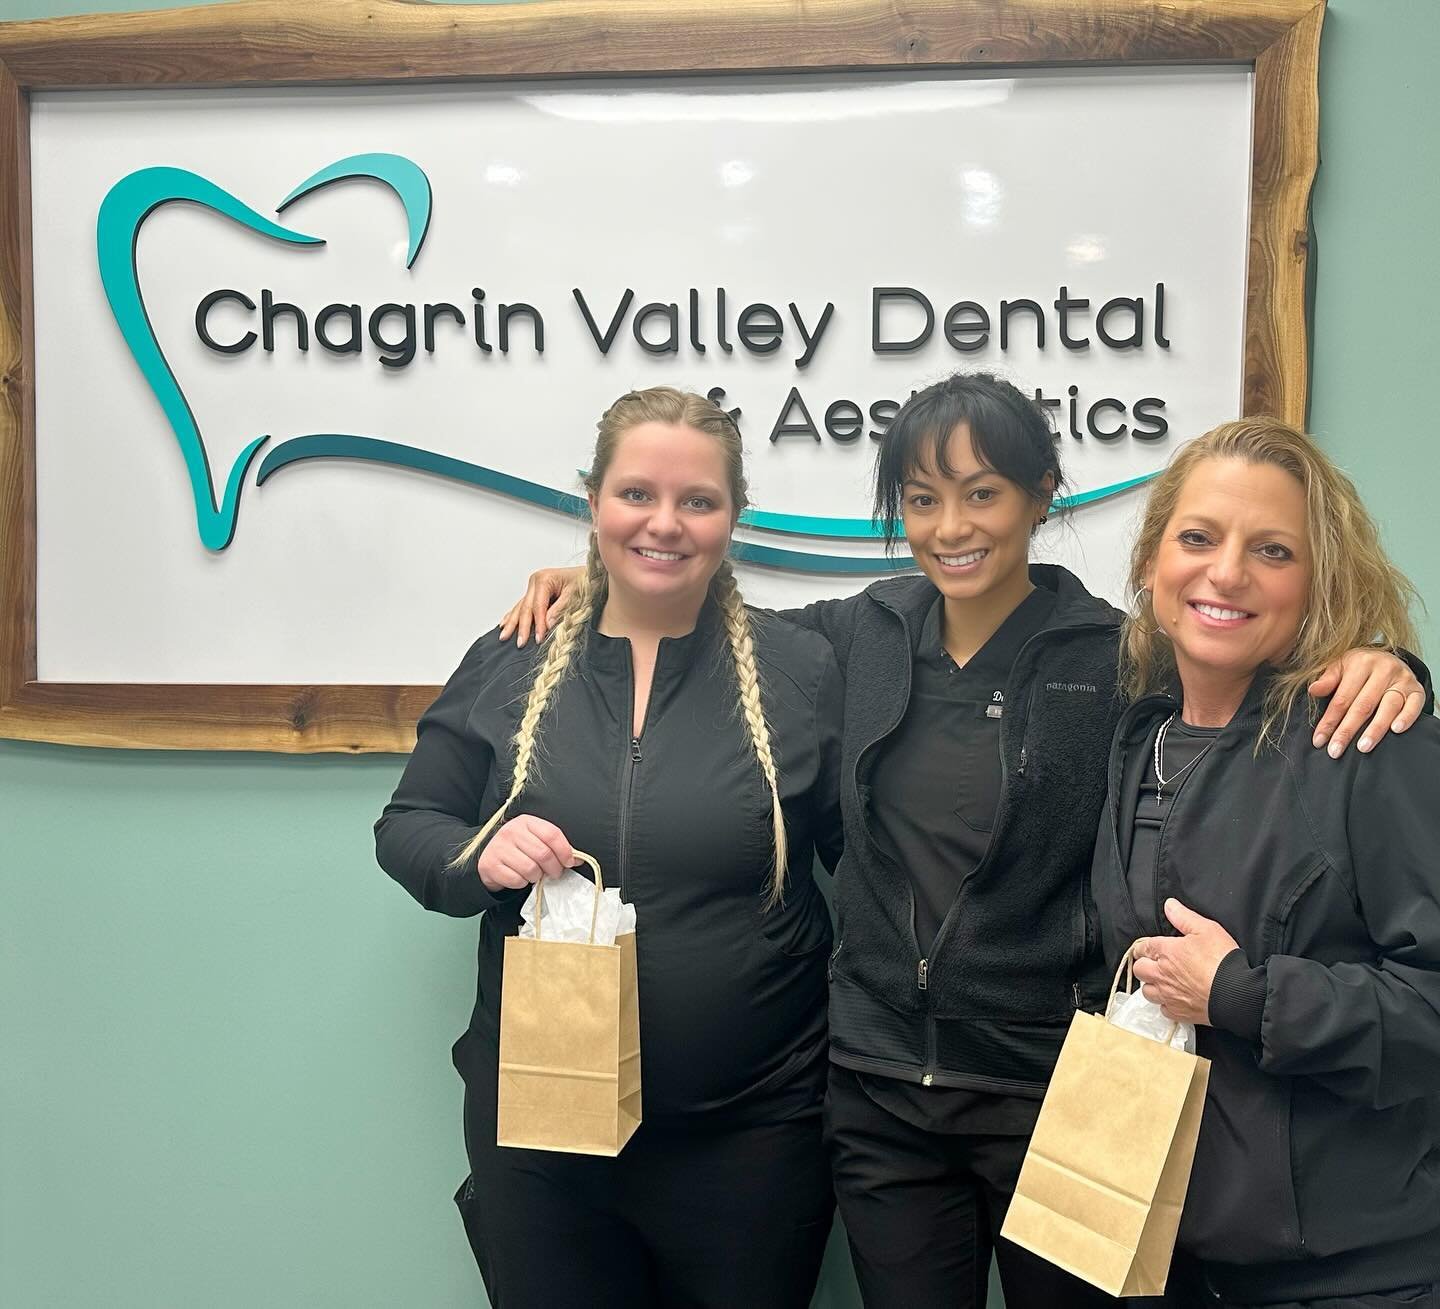 Happy National Dental Hygienist Week! 🦷 
We celebrate this week for Mel and Wendy - our dynamic duo of dental care! 😄 From making flossing fun to sharing dental care tips with a smile, they rock!! 🌟 

They make coming to the dentist something to l